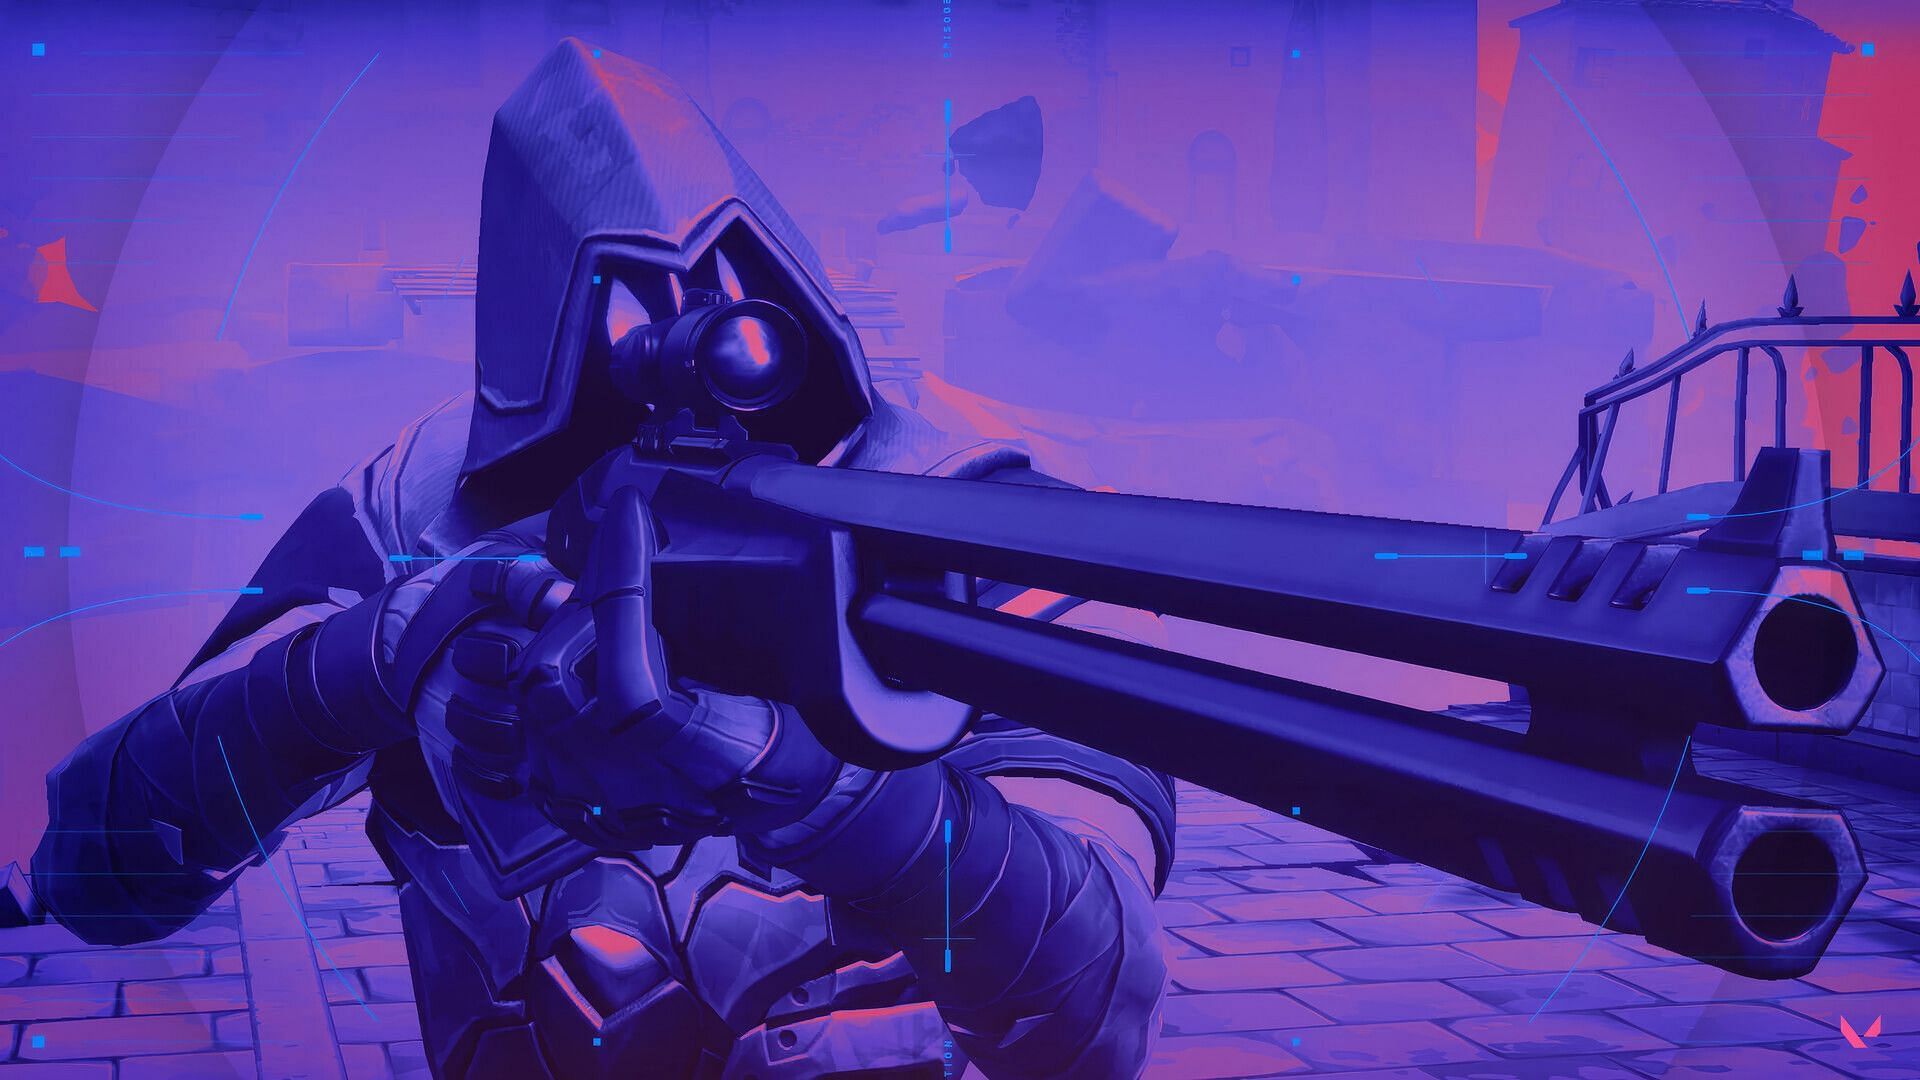 Omen wielding the Outlaw sniper rifle (Image via Riot Games)